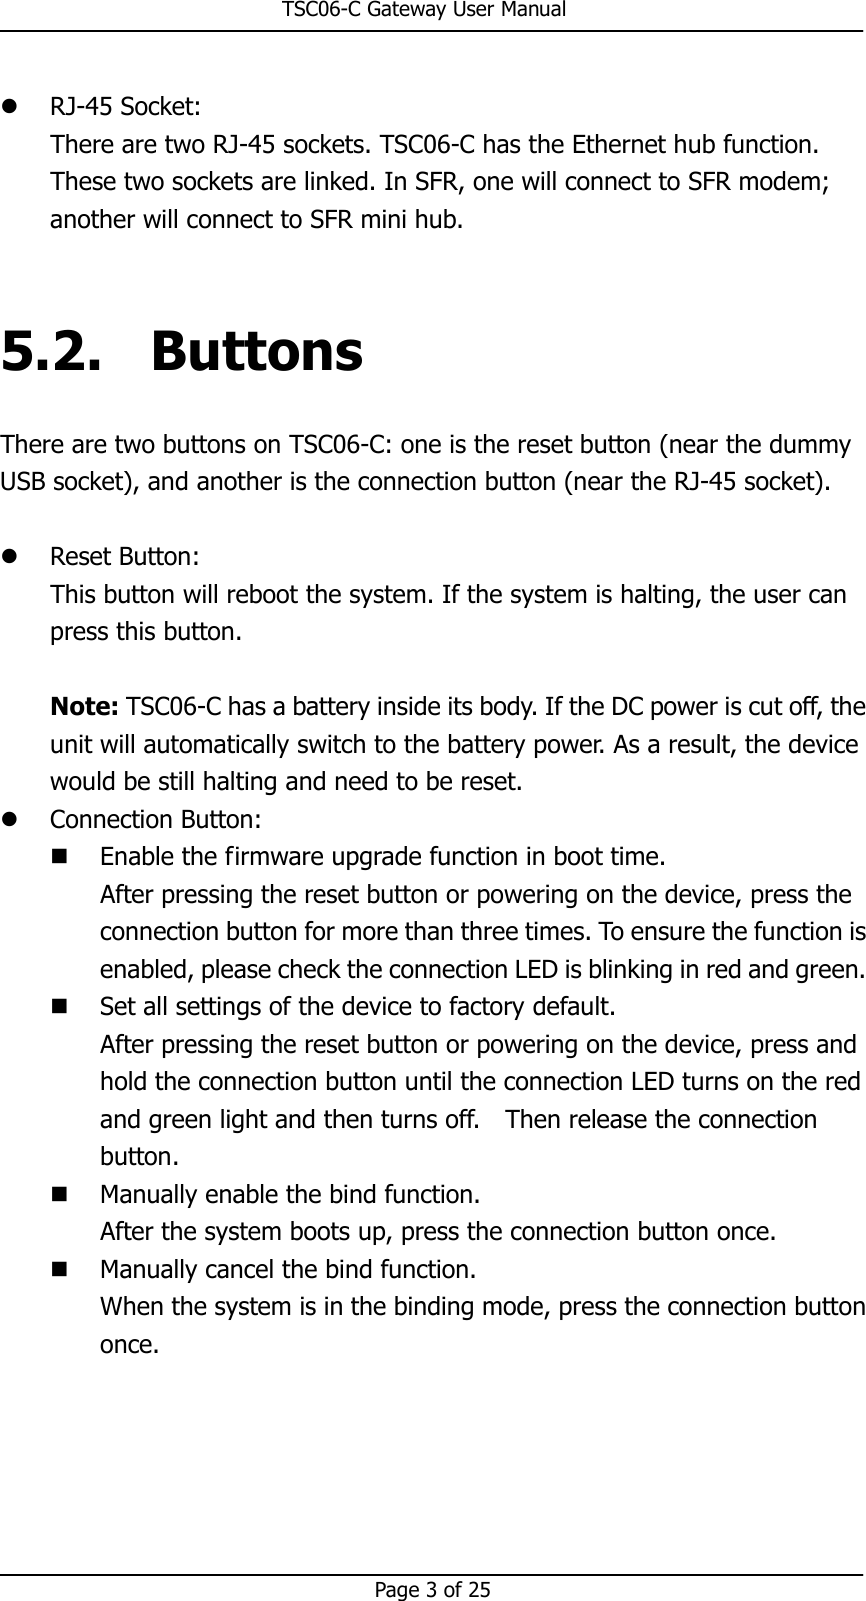                                                       TSC06-C Gateway User Manual   Page 3 of 25   RJ-45 Socket: There are two RJ-45 sockets. TSC06-C has the Ethernet hub function. These two sockets are linked. In SFR, one will connect to SFR modem; another will connect to SFR mini hub.  5.2. Buttons There are two buttons on TSC06-C: one is the reset button (near the dummy USB socket), and another is the connection button (near the RJ-45 socket).     Reset Button: This button will reboot the system. If the system is halting, the user can press this button.  Note: TSC06-C has a battery inside its body. If the DC power is cut off, the unit will automatically switch to the battery power. As a result, the device would be still halting and need to be reset.  Connection Button:  Enable the firmware upgrade function in boot time. After pressing the reset button or powering on the device, press the connection button for more than three times. To ensure the function is enabled, please check the connection LED is blinking in red and green.  Set all settings of the device to factory default. After pressing the reset button or powering on the device, press and hold the connection button until the connection LED turns on the red and green light and then turns off.    Then release the connection button.  Manually enable the bind function. After the system boots up, press the connection button once.    Manually cancel the bind function. When the system is in the binding mode, press the connection button once.  